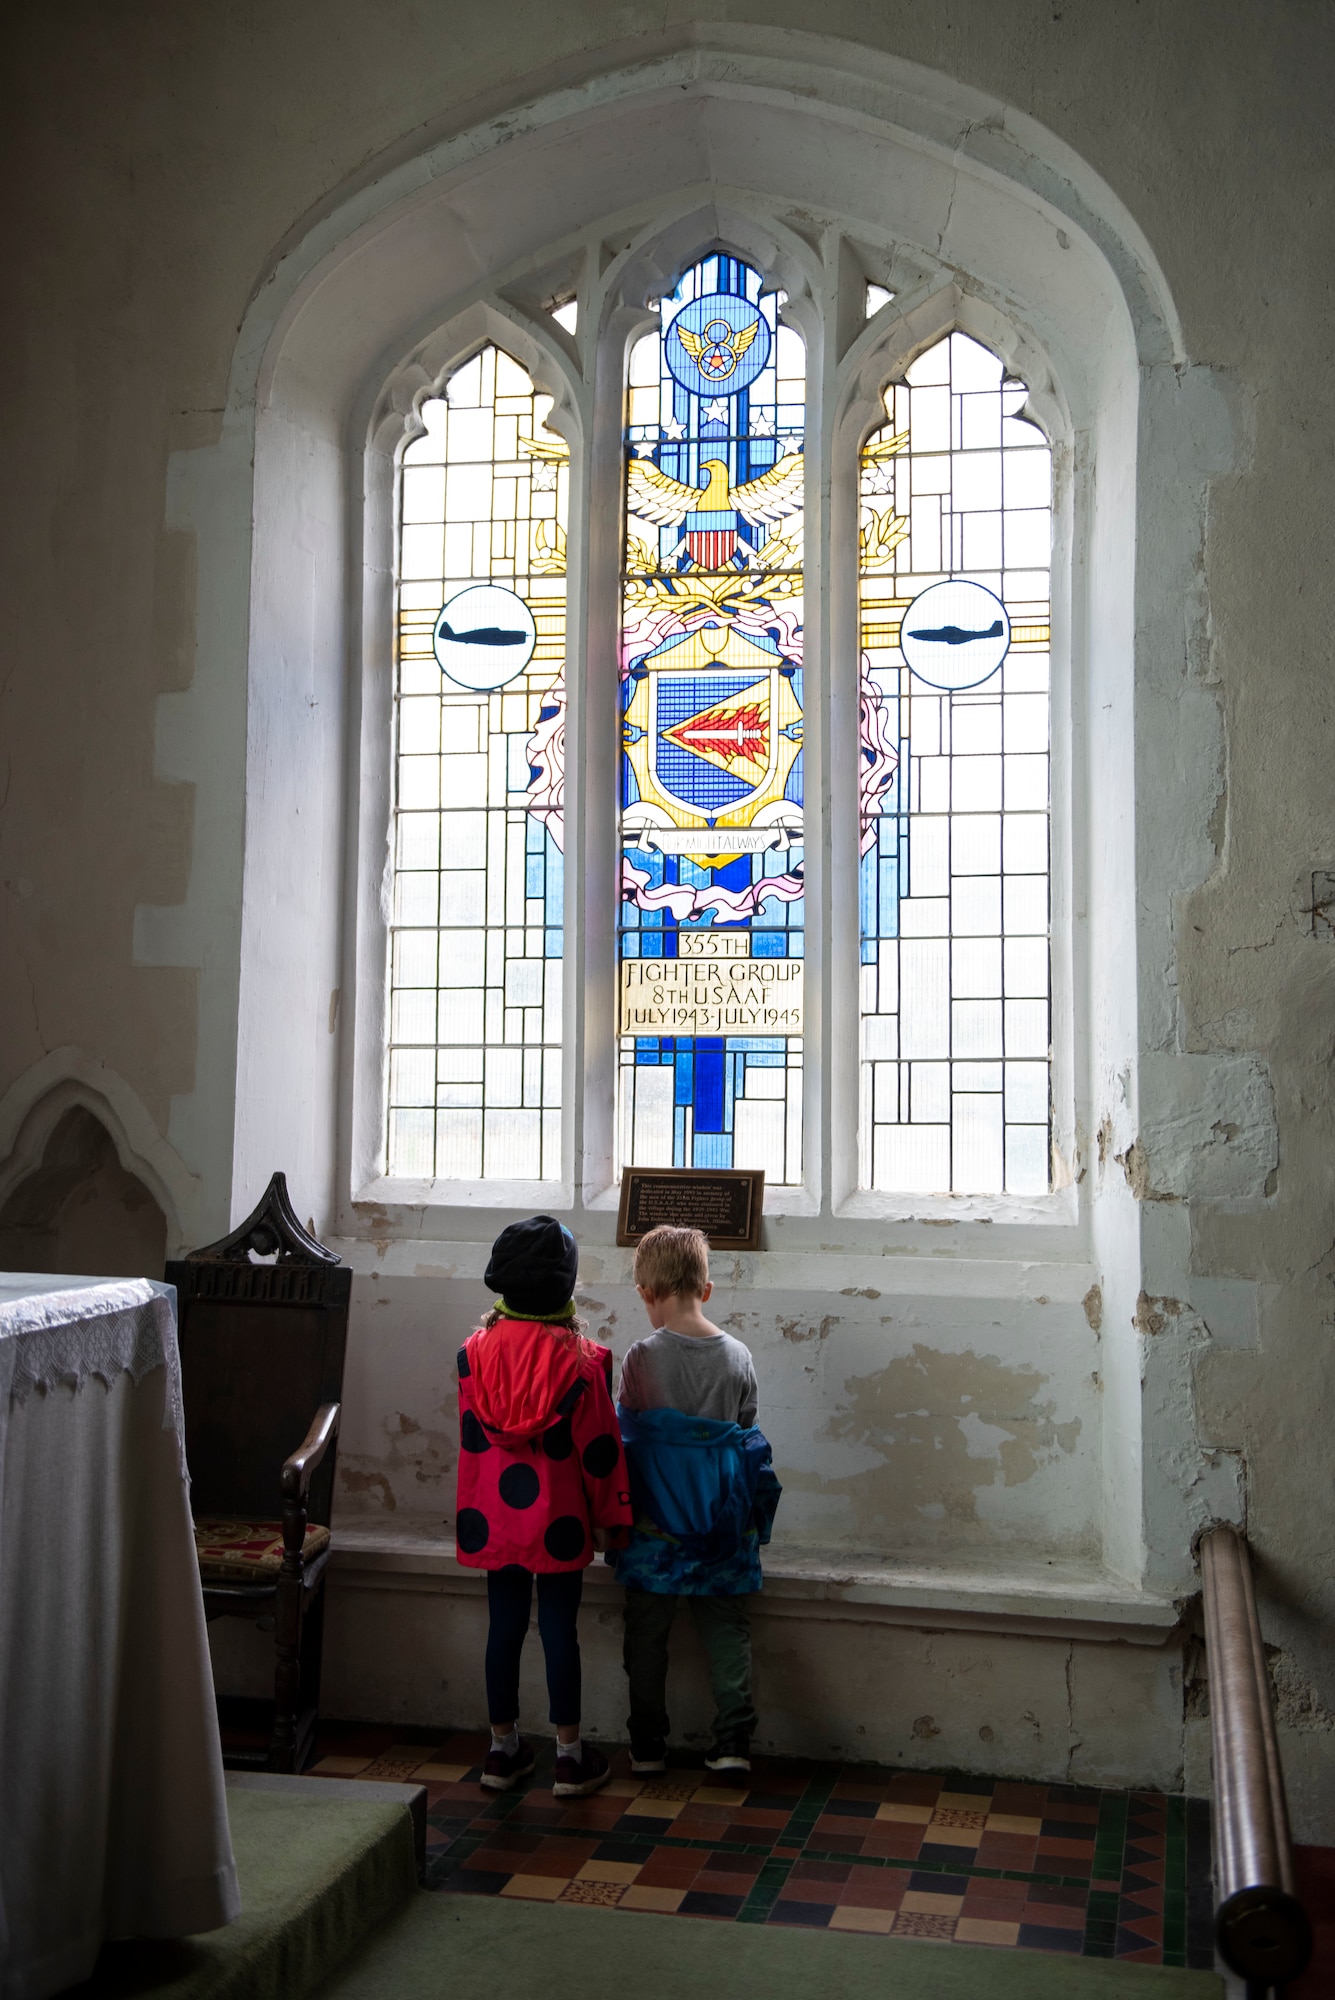 Kaitlyn and Joshua Dunmire look at the memorial window at St. Catherine’s Church in Litlington, England, August 15, 2020. U.S. Africa Command Directorate for Intelligence at RAF Molesworth partnered with the American Battle Monuments Commission to host Operation TORCH-2020, where over 50 military members and their families, U.K. nationals and Boy Scout Troop #245, cleaned six WWII memorial sites to preserve American service member legacies and promote an appreciation of past American heroes among present-day USAFRICOM workforce and families. (U.S. Air Force Photo by Airman 1st Class Jennifer Zima)